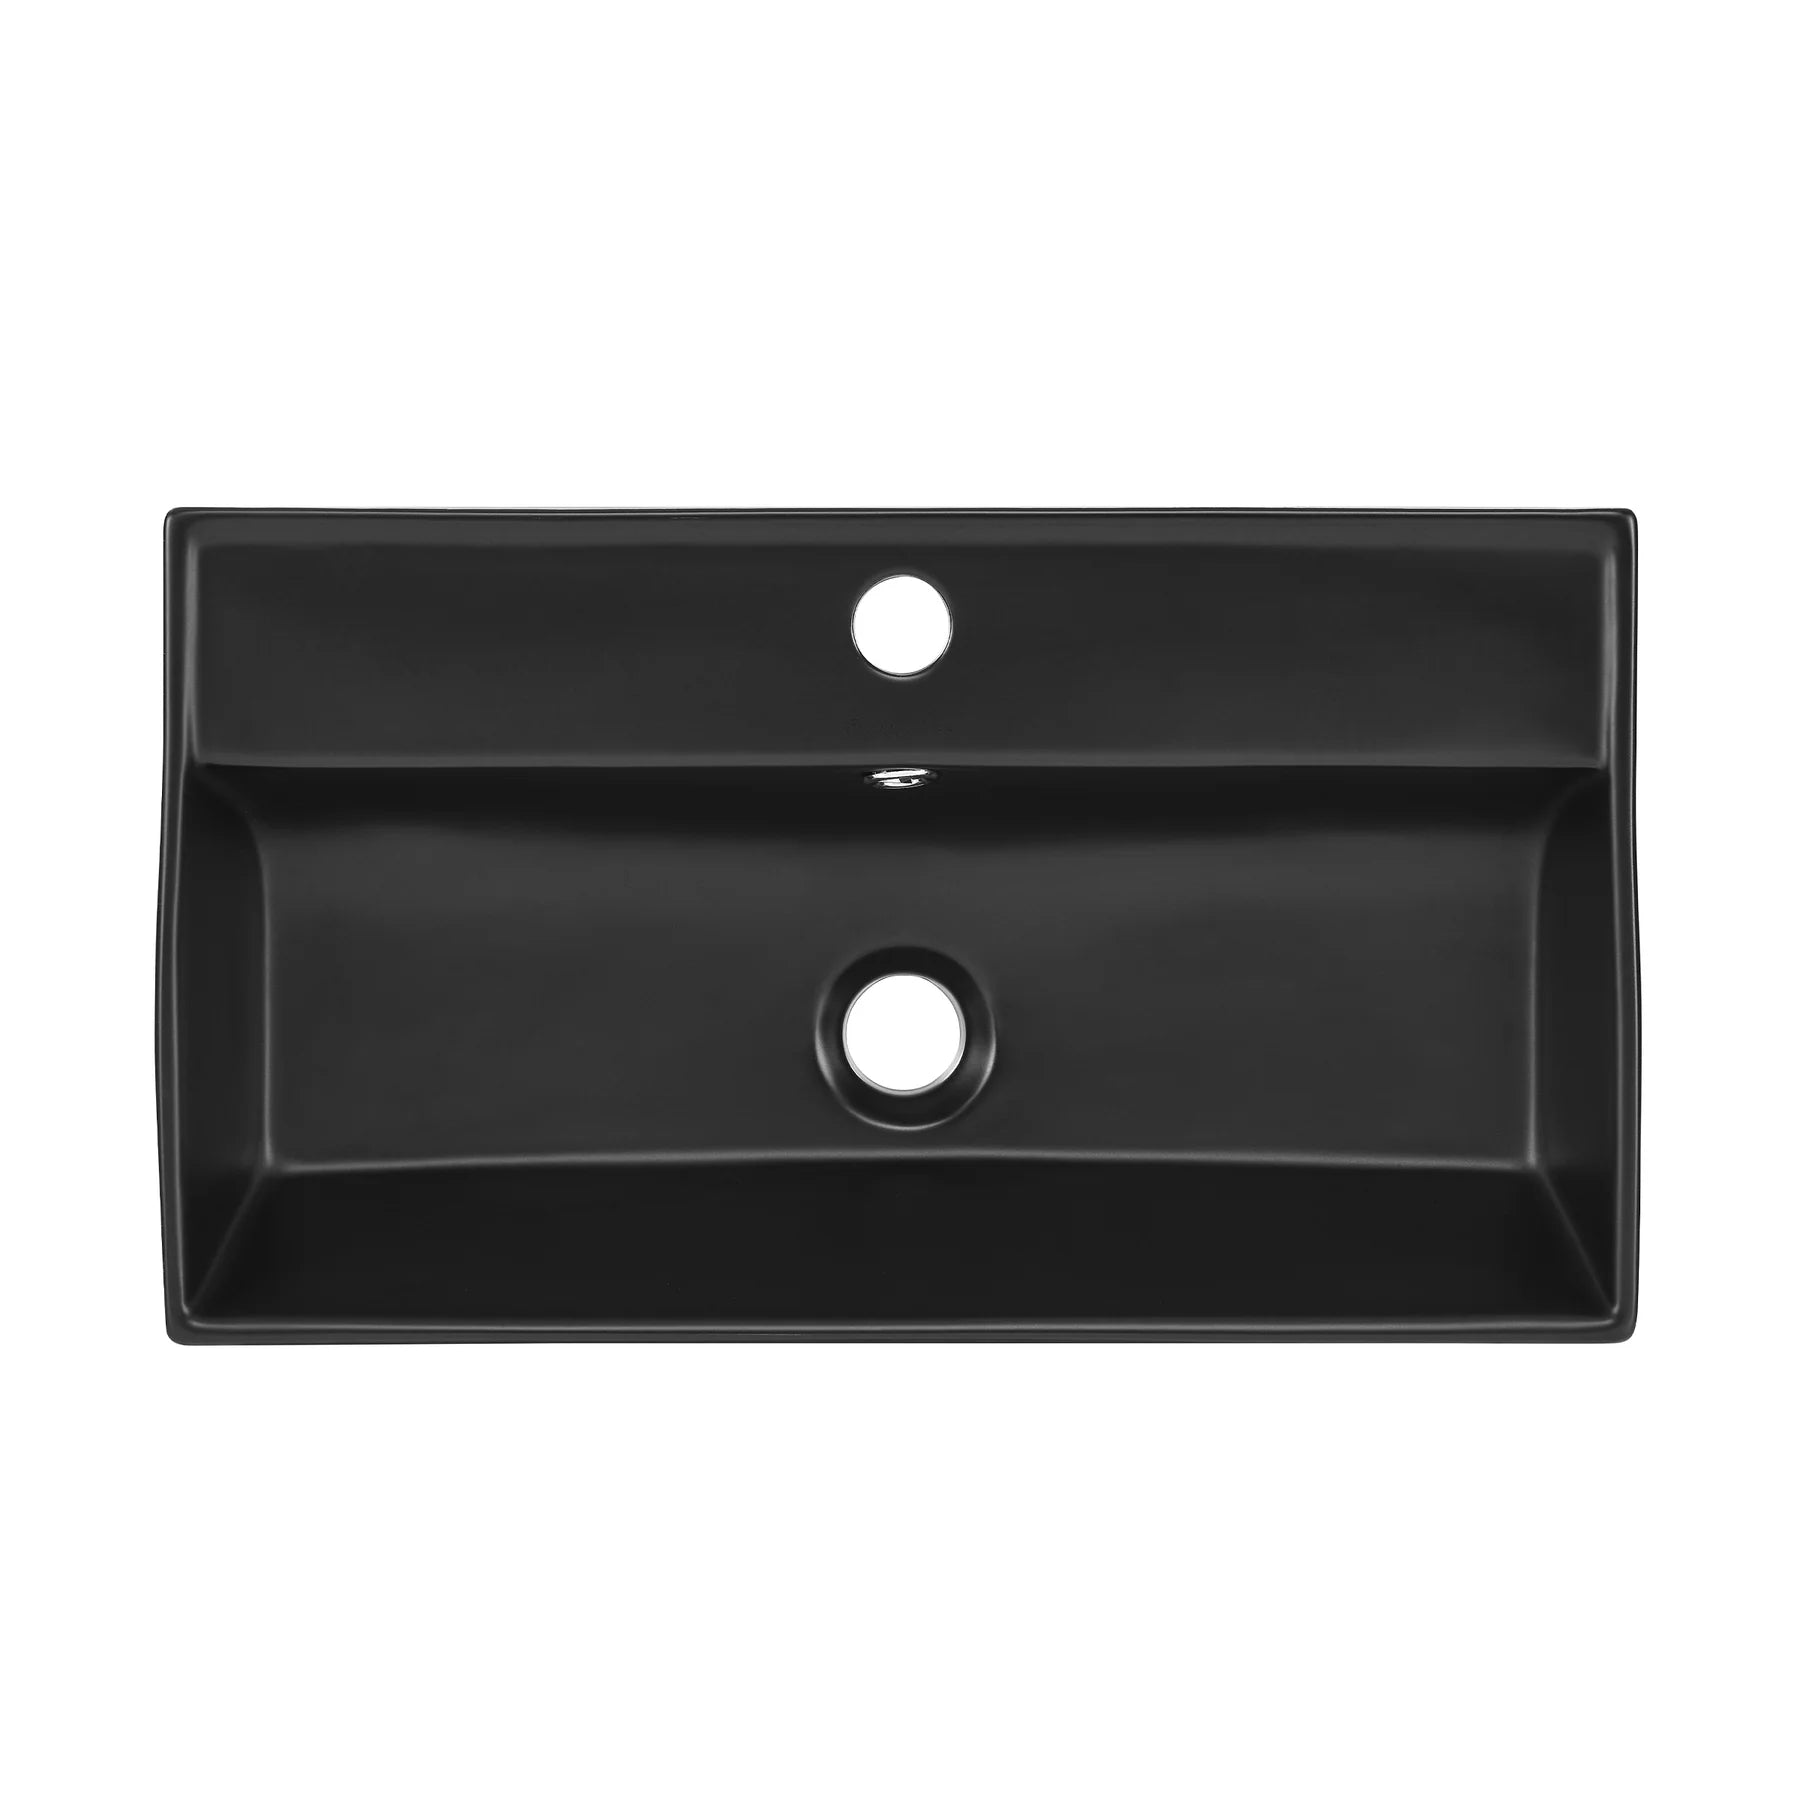 Swiss Madison Claire 22" Rectangle Wall-Mount Bathroom Sink in Matte Black - SM-WS318MB